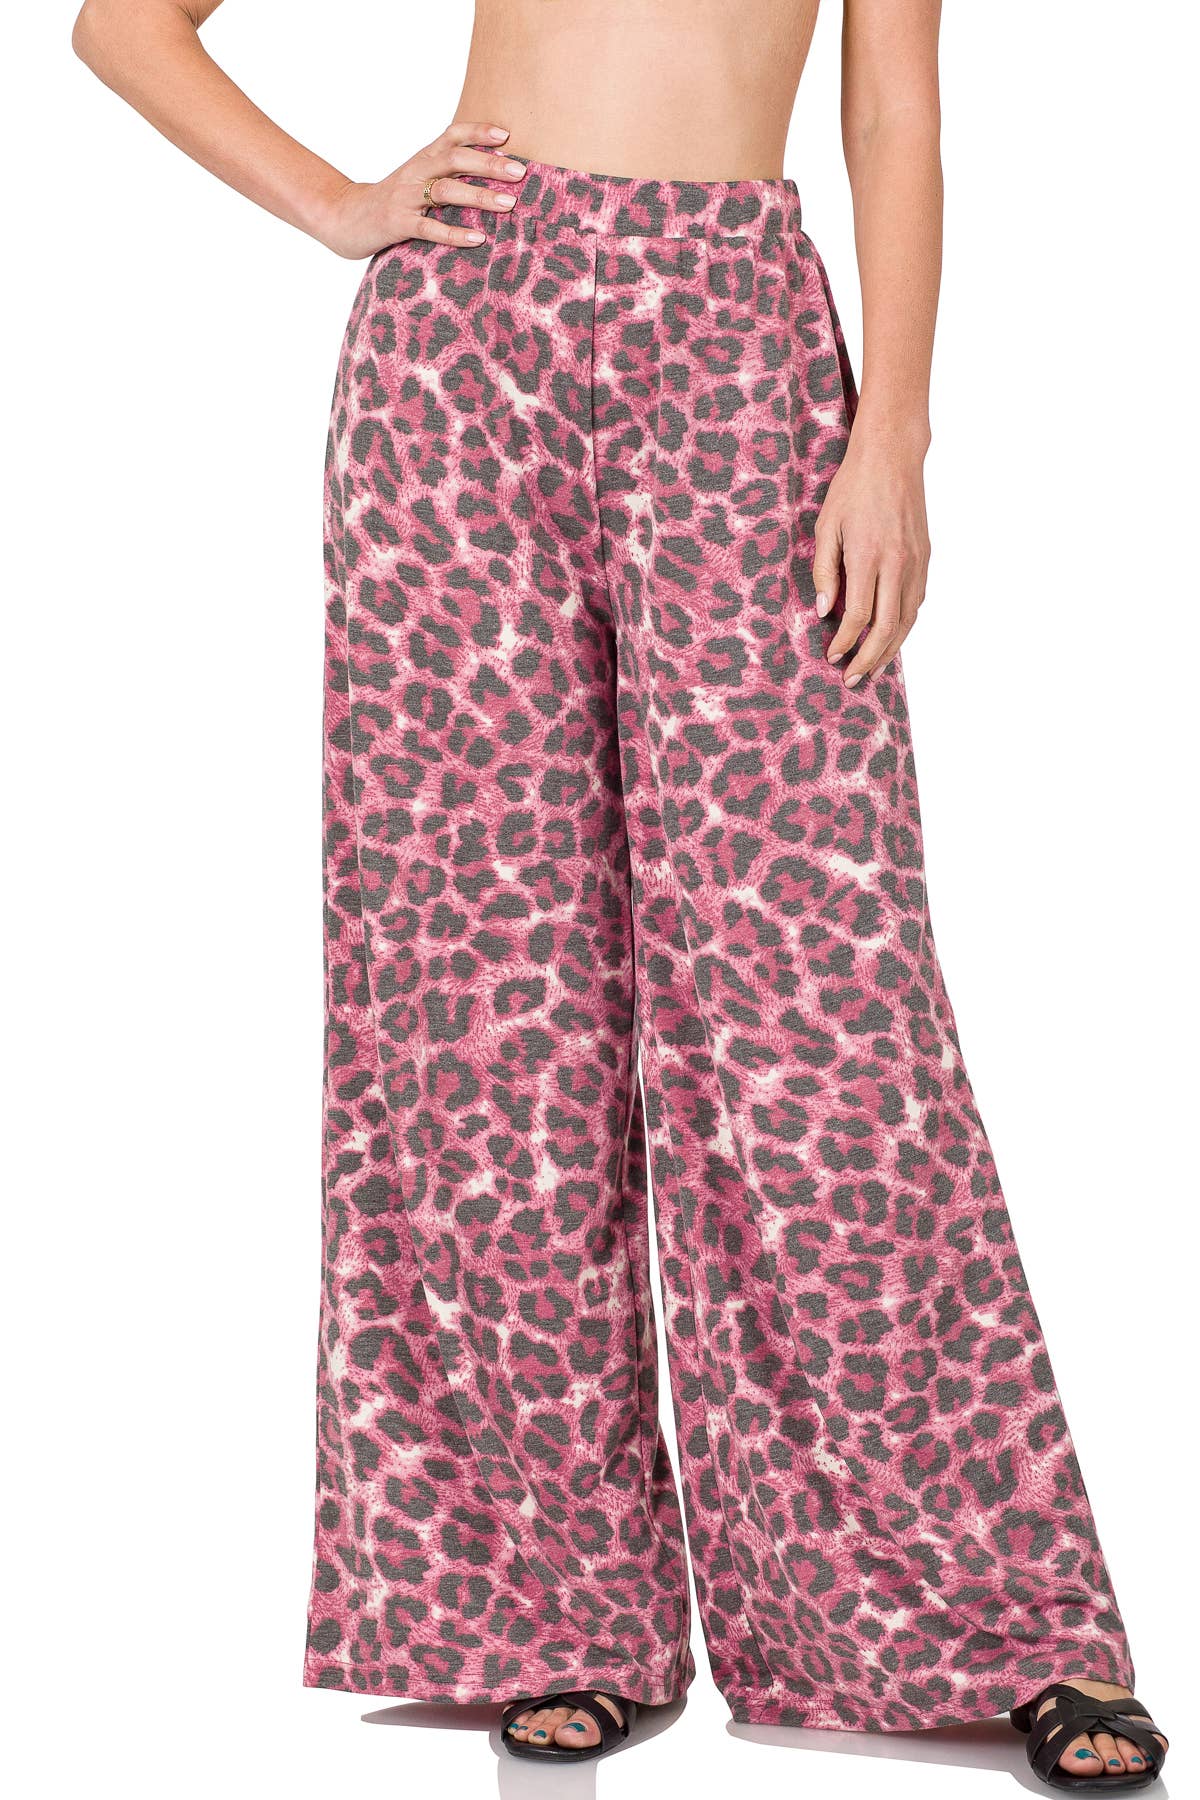 SI-21717 SOFT FRENCH TERRY LEOPARD WIDE LEG PANTS